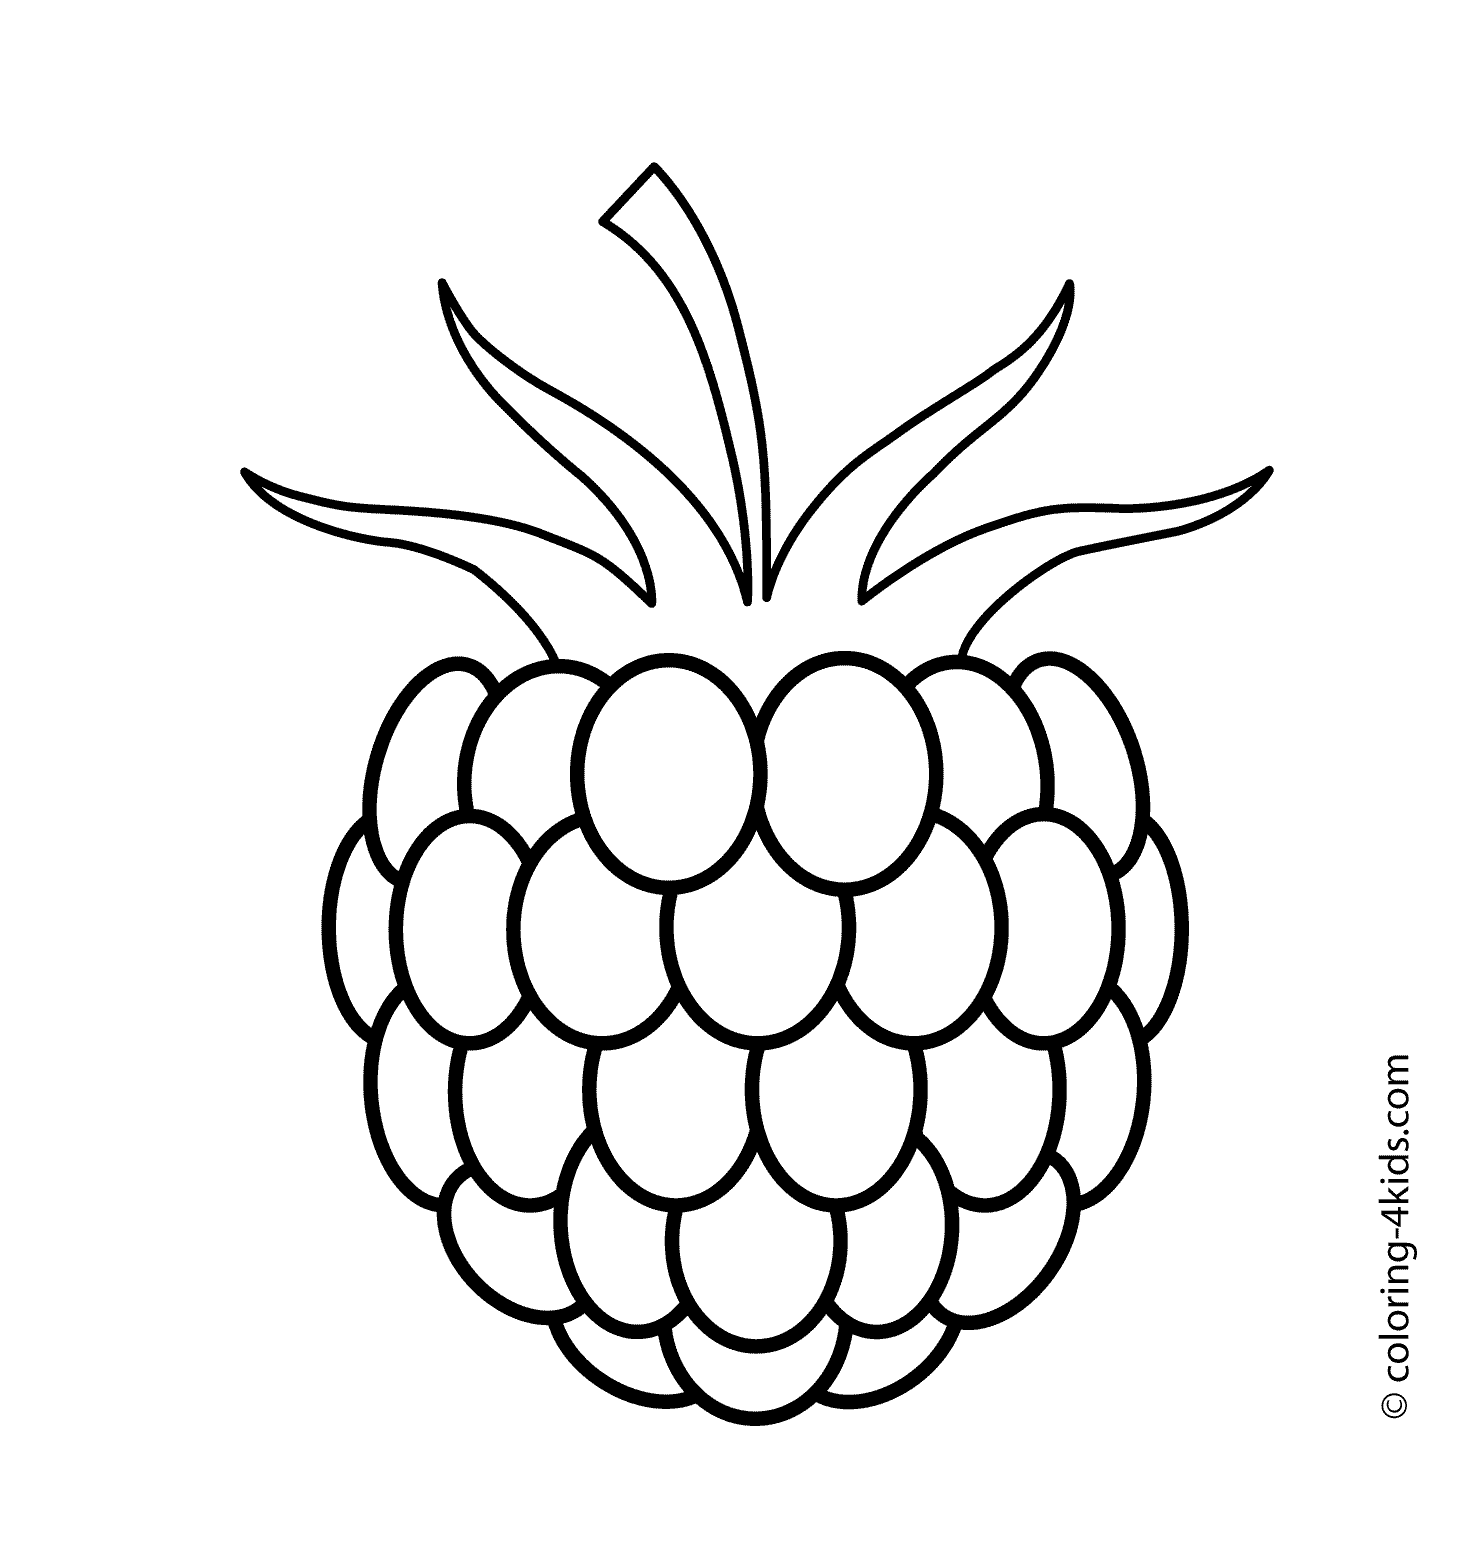 Berries clipart outline. One raspberry fruits and